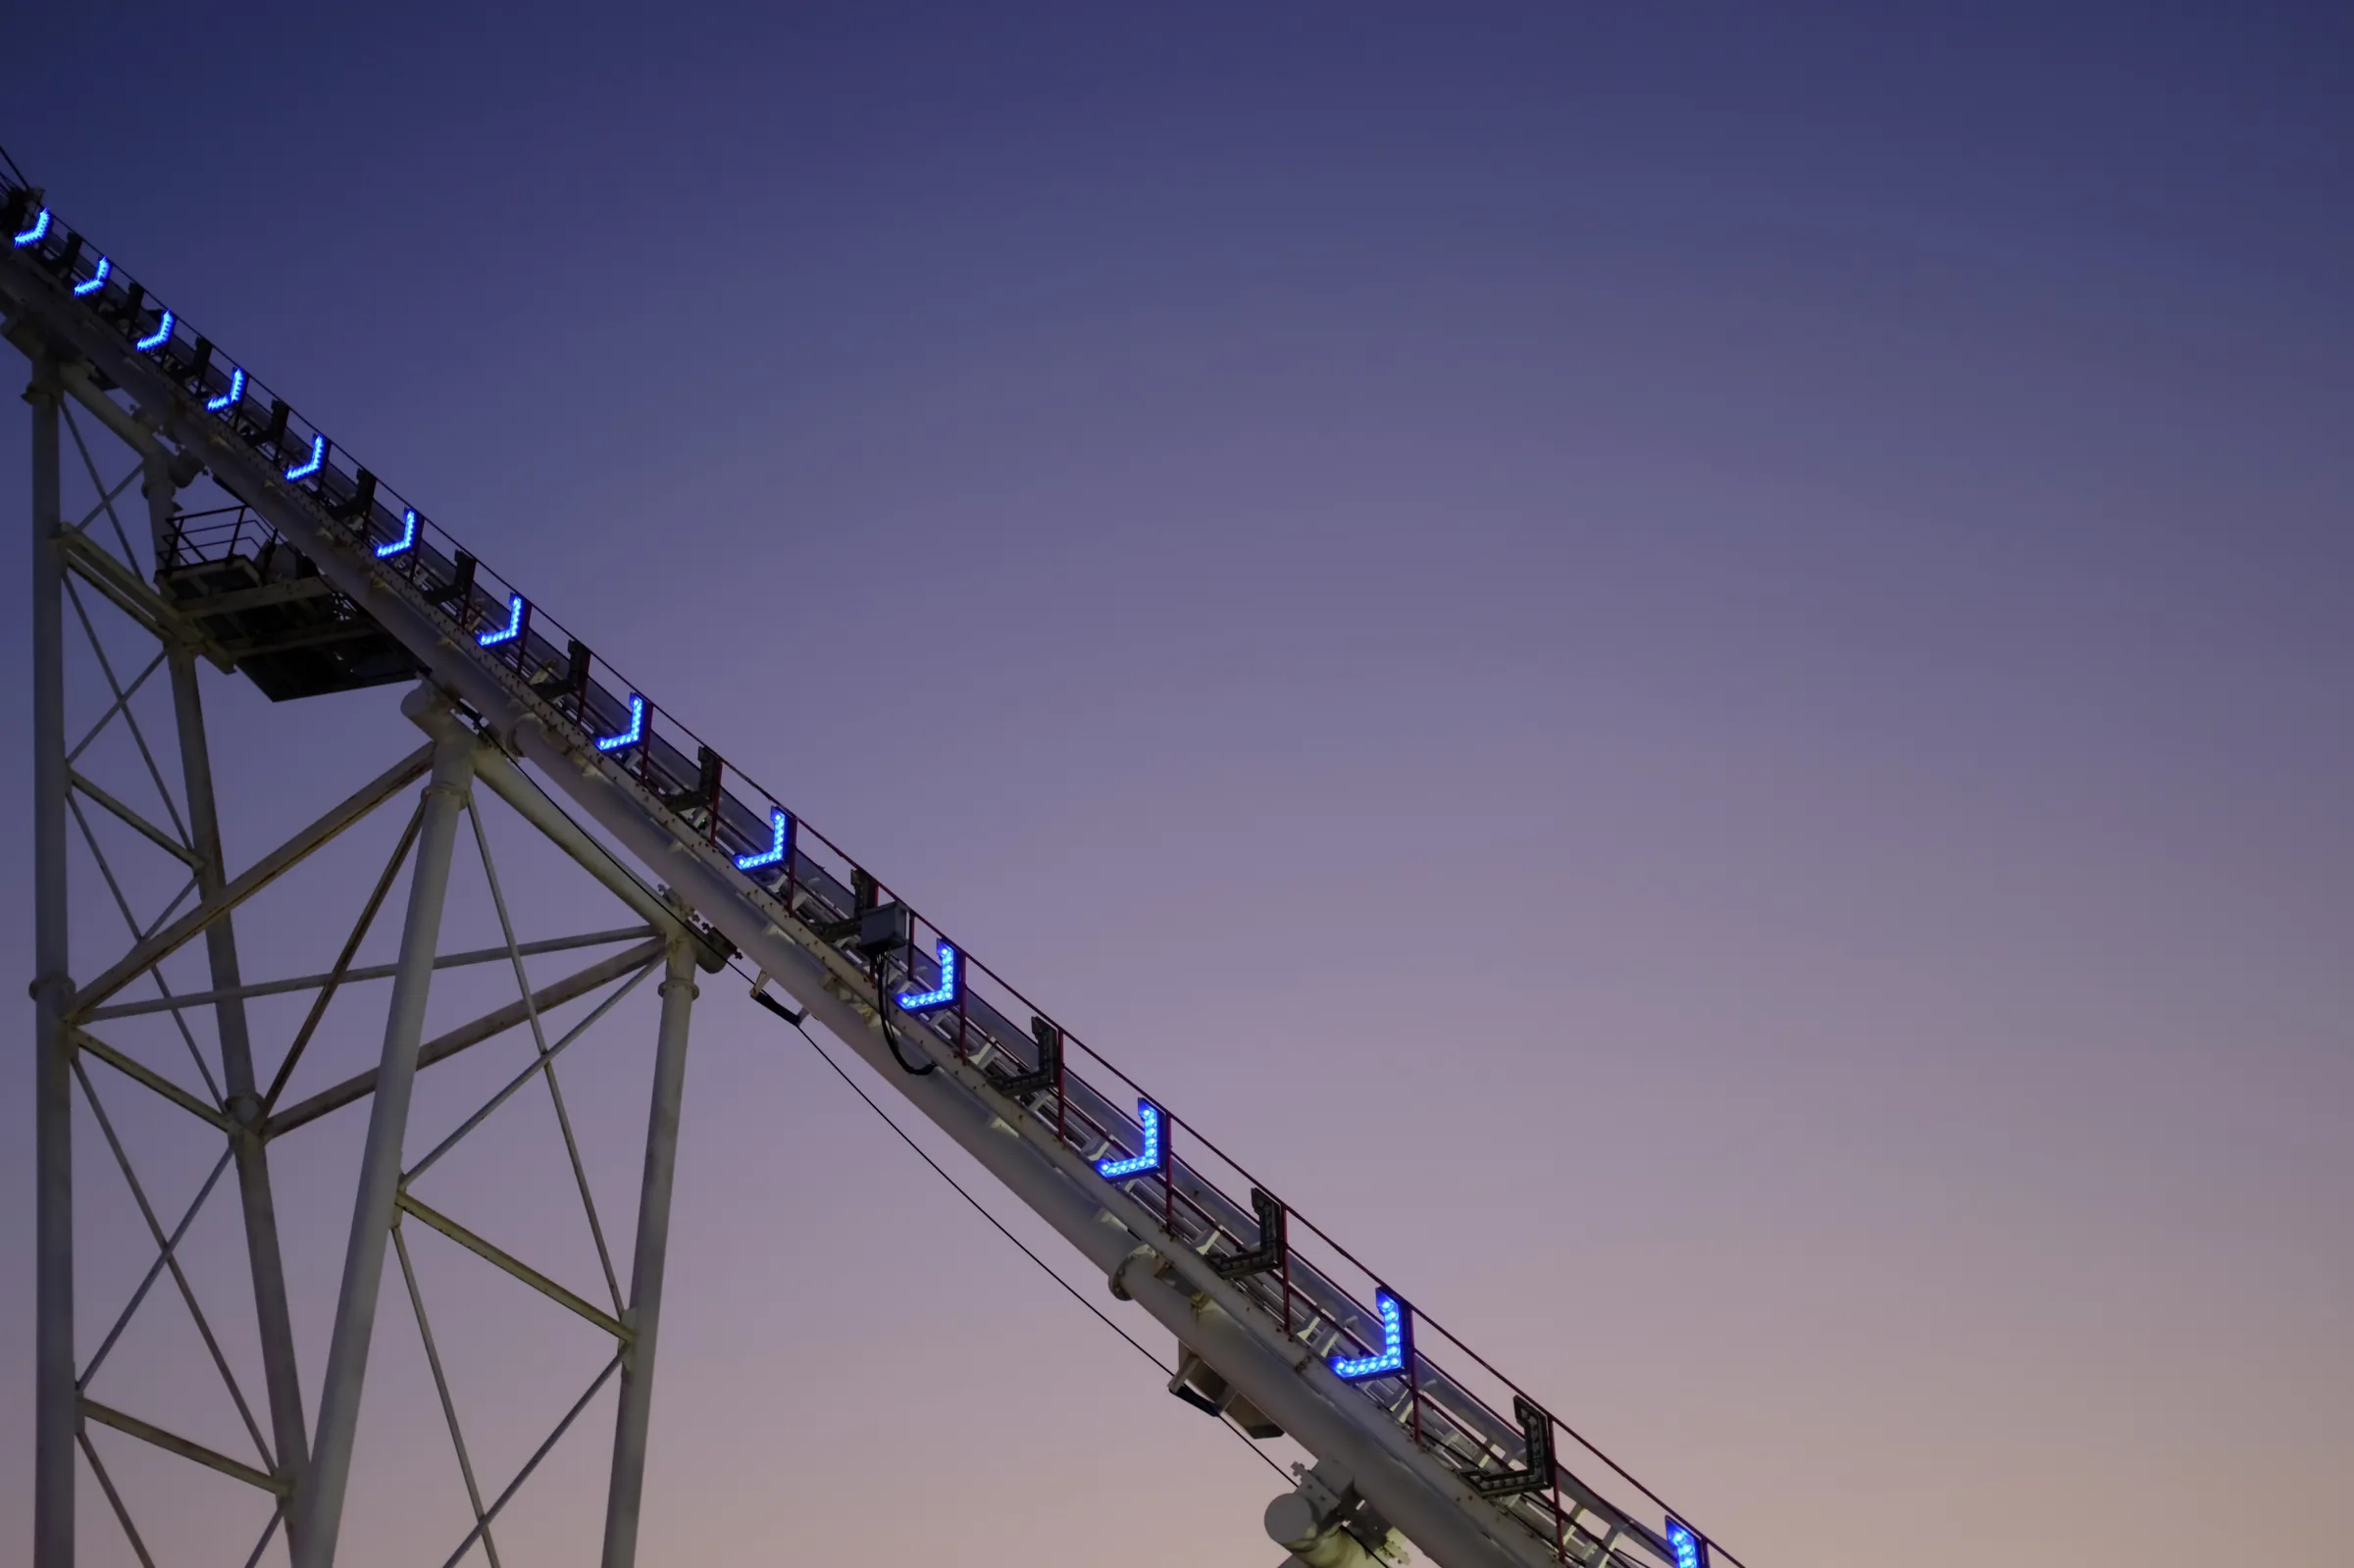 A roller coaster track, descending downward at 45 degrees, blue arrows lets along the line, in front of purple evening sky blending into the last bit of pastel orange from the setting sun.